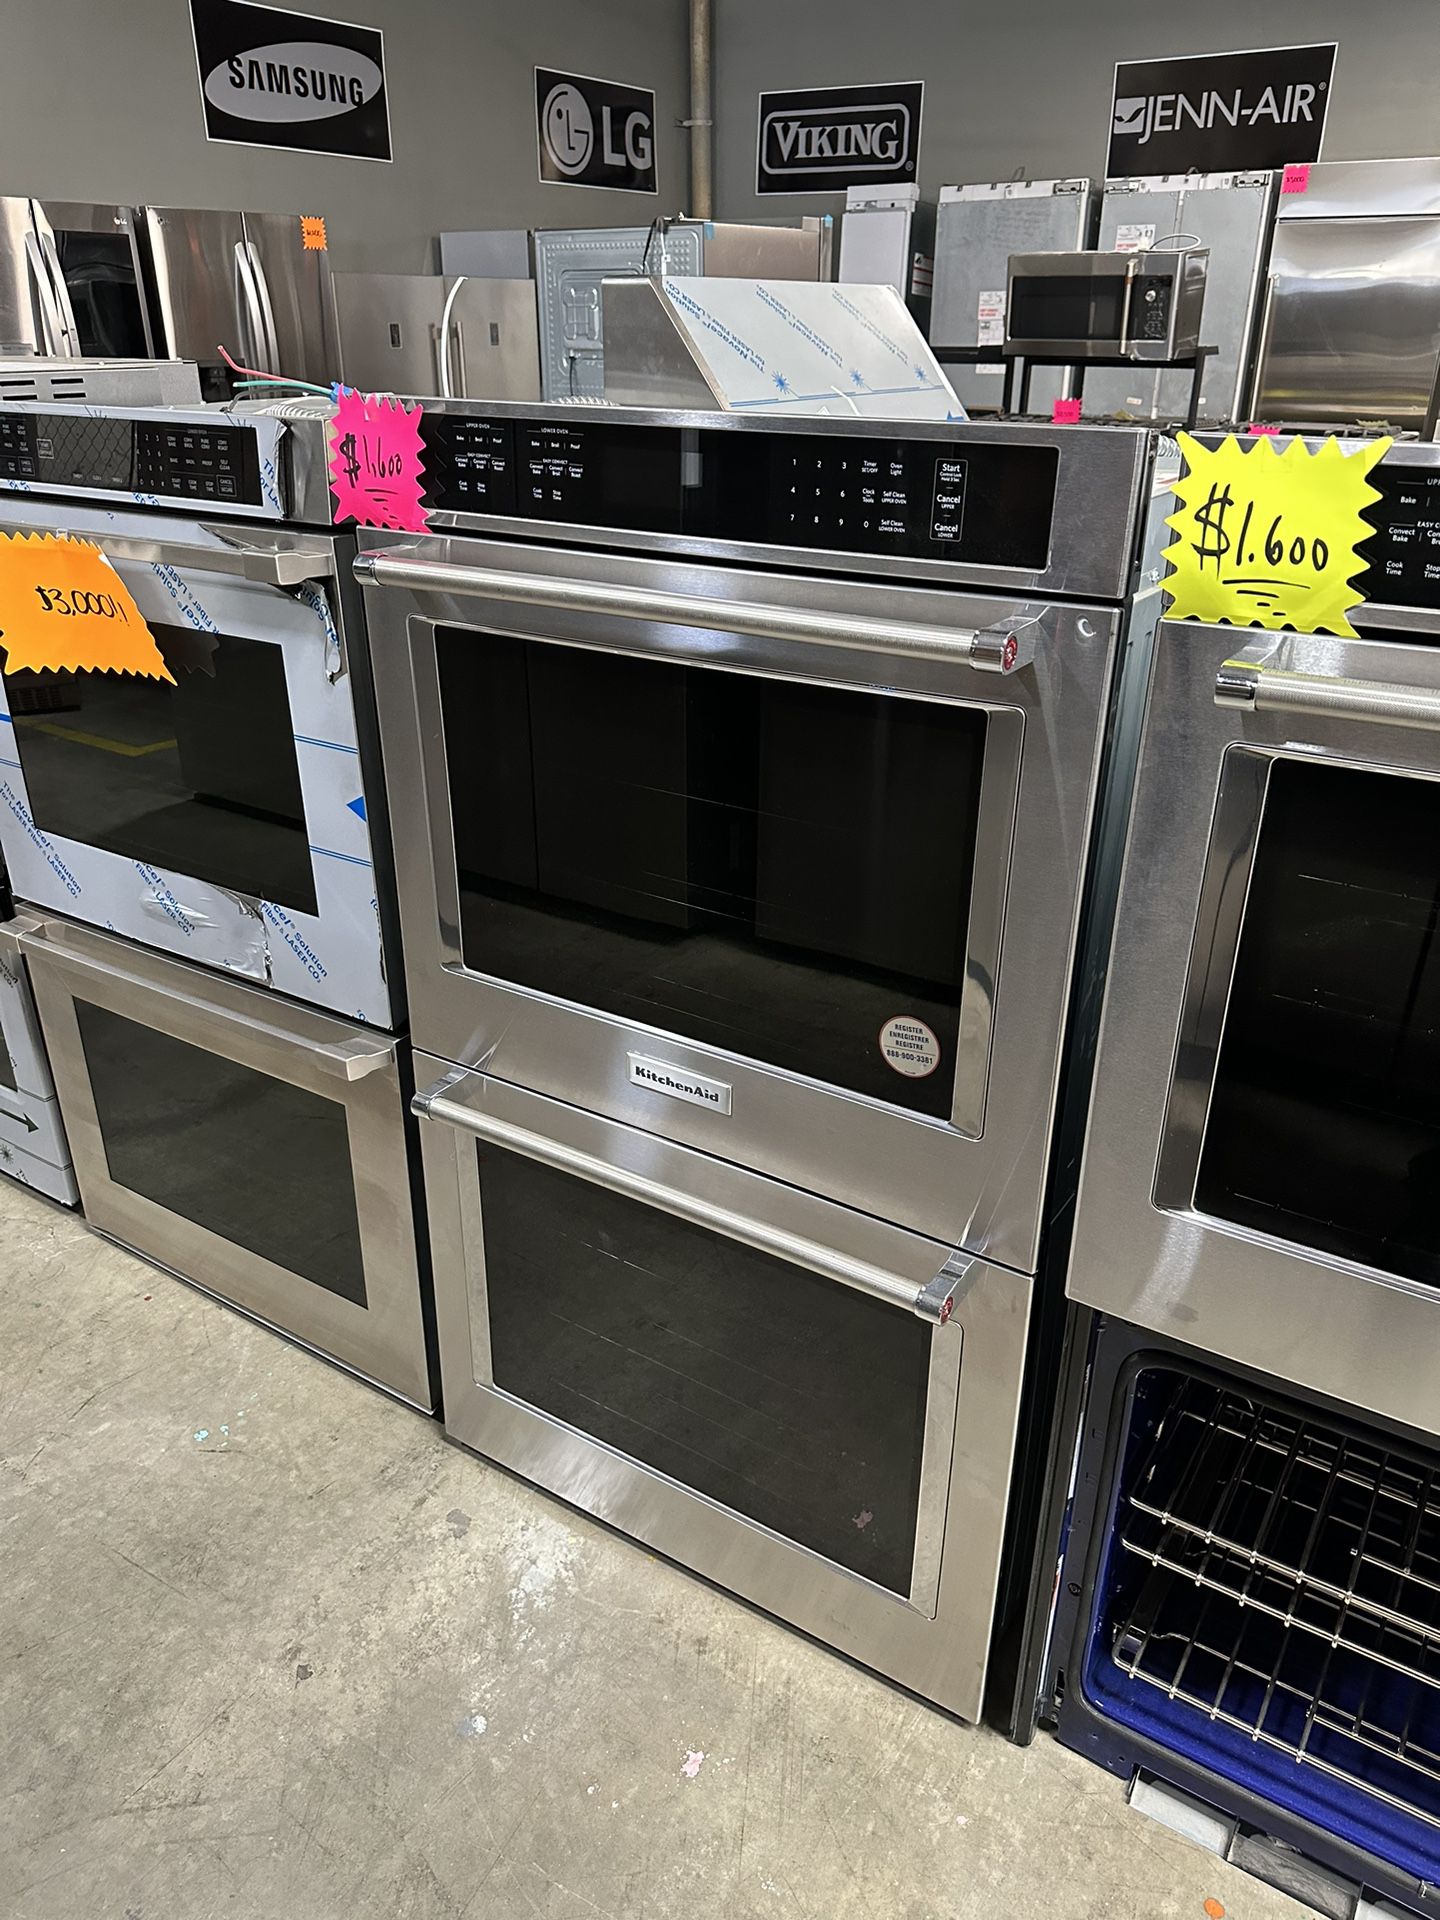 KITCHEN AID double wall oven